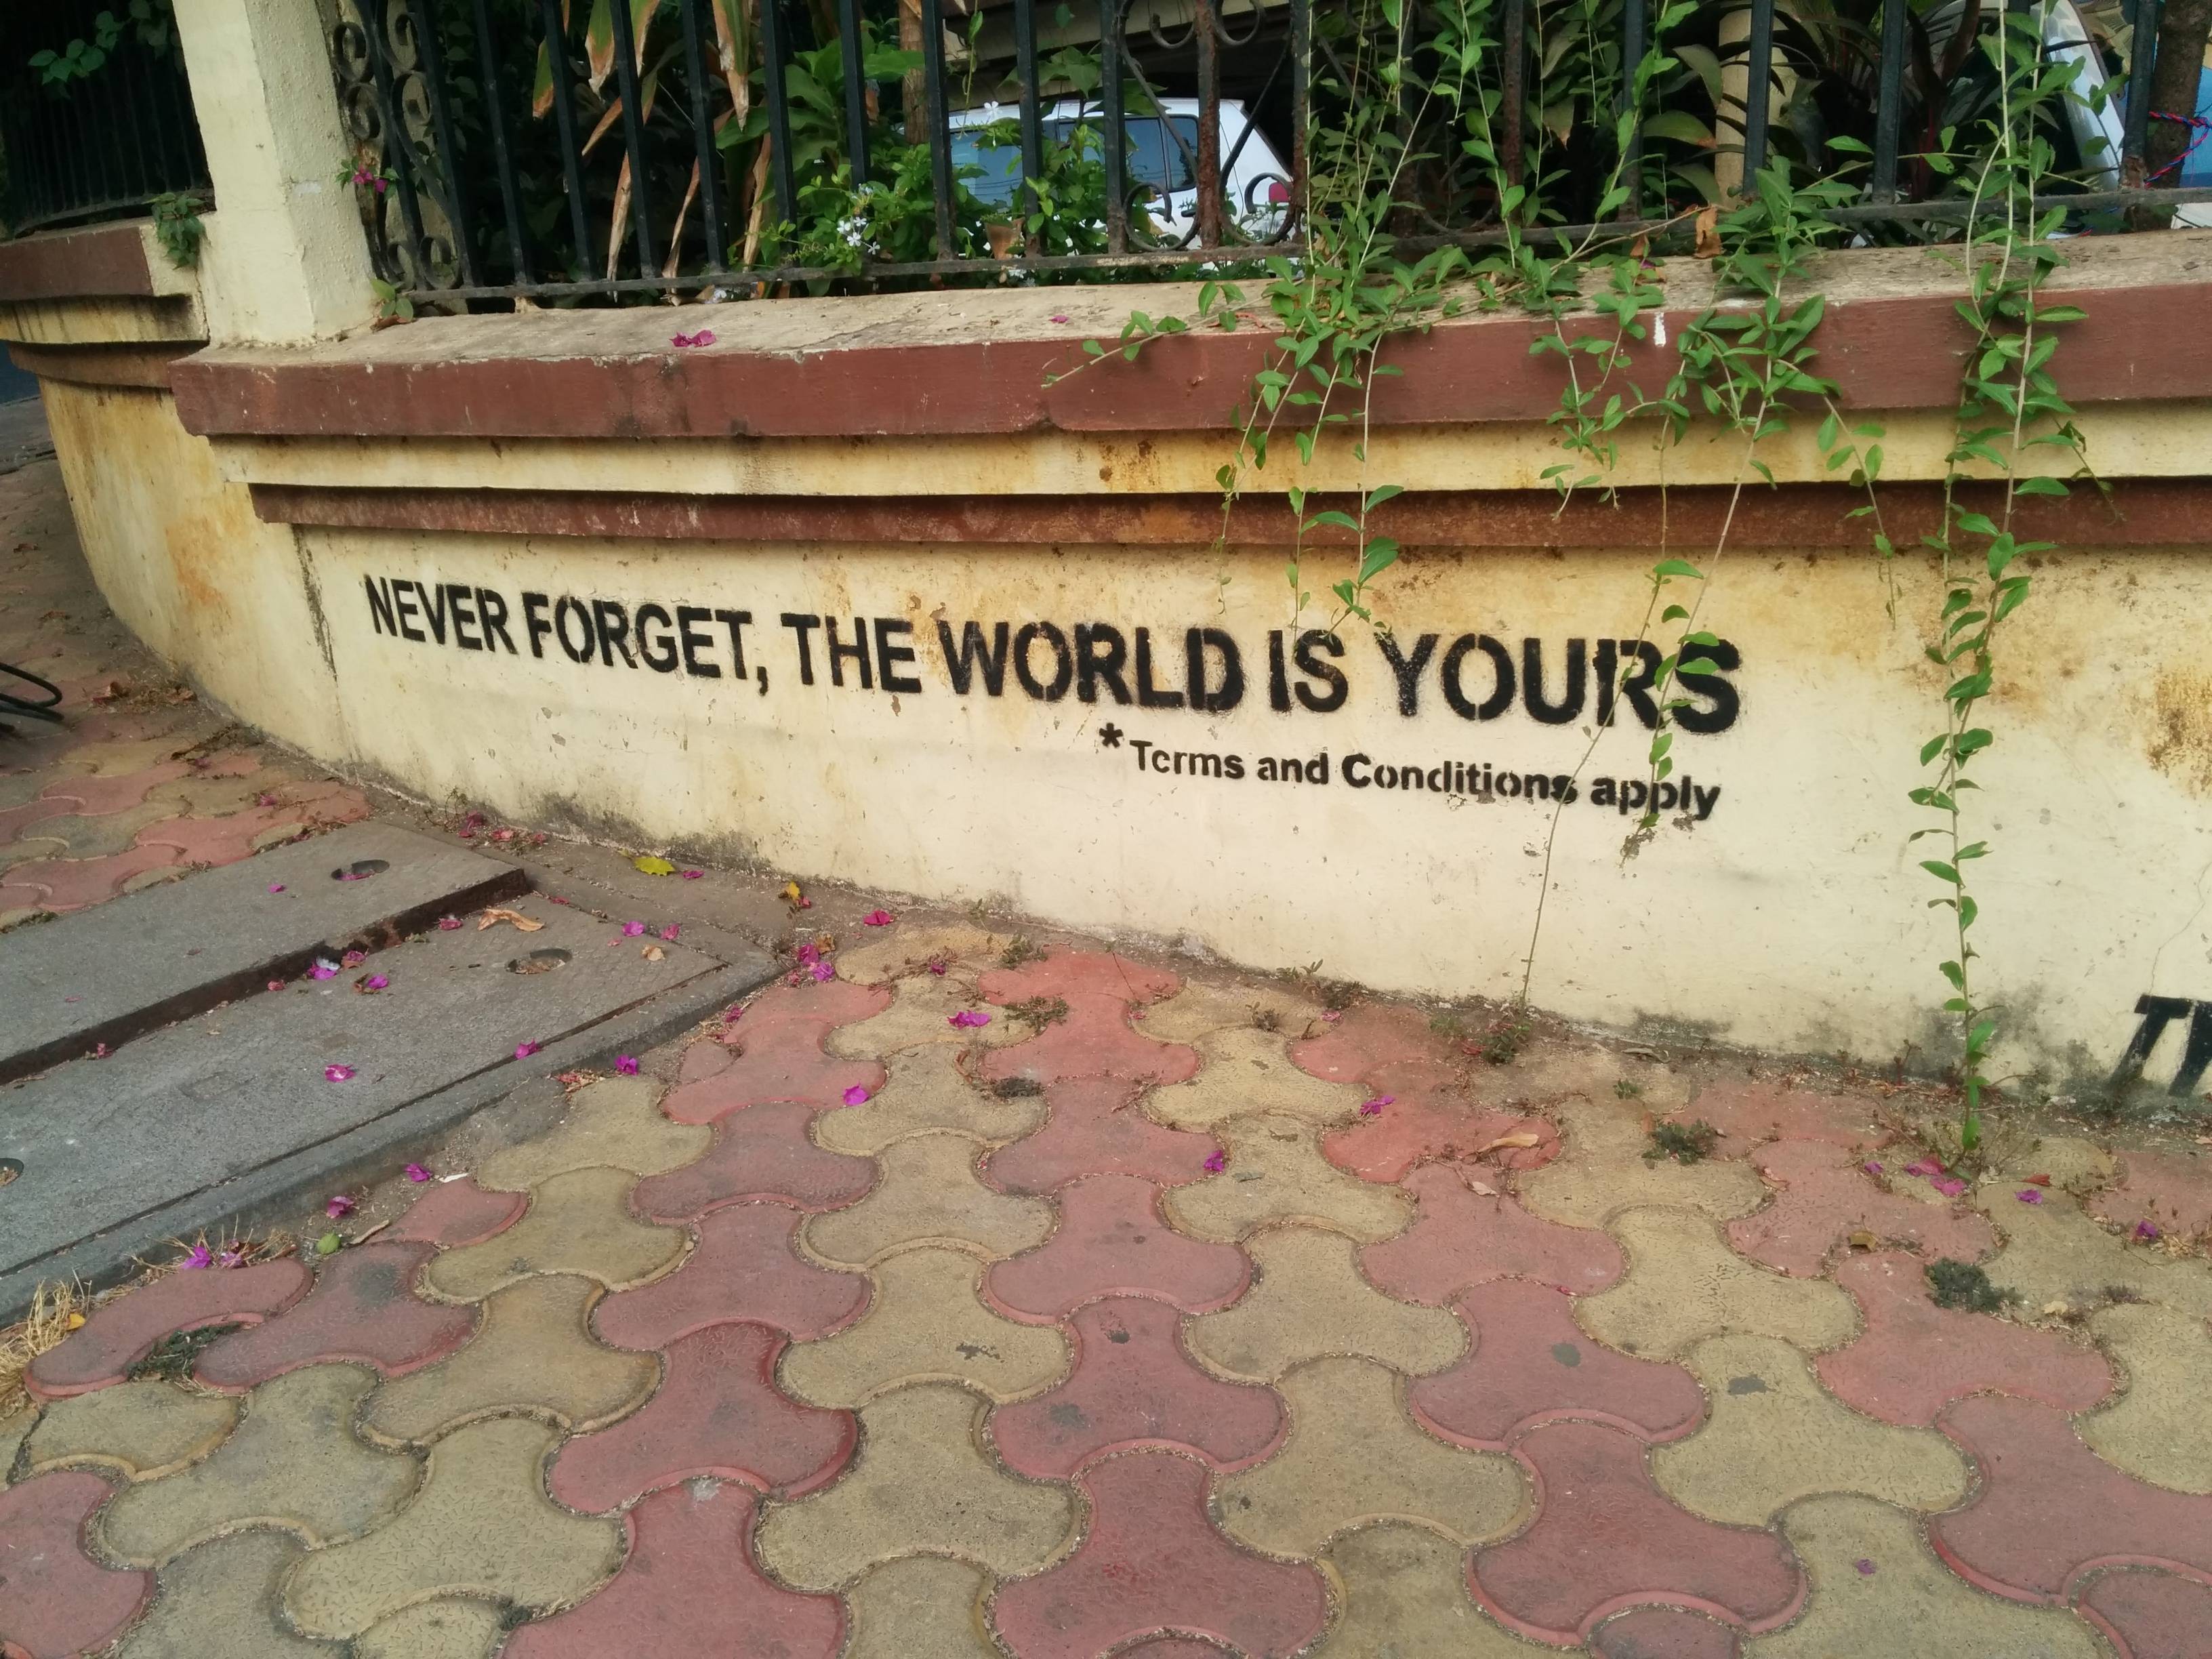 never forget the world is yours - Never Forget, The World Is Yours Terms and Conditions apply